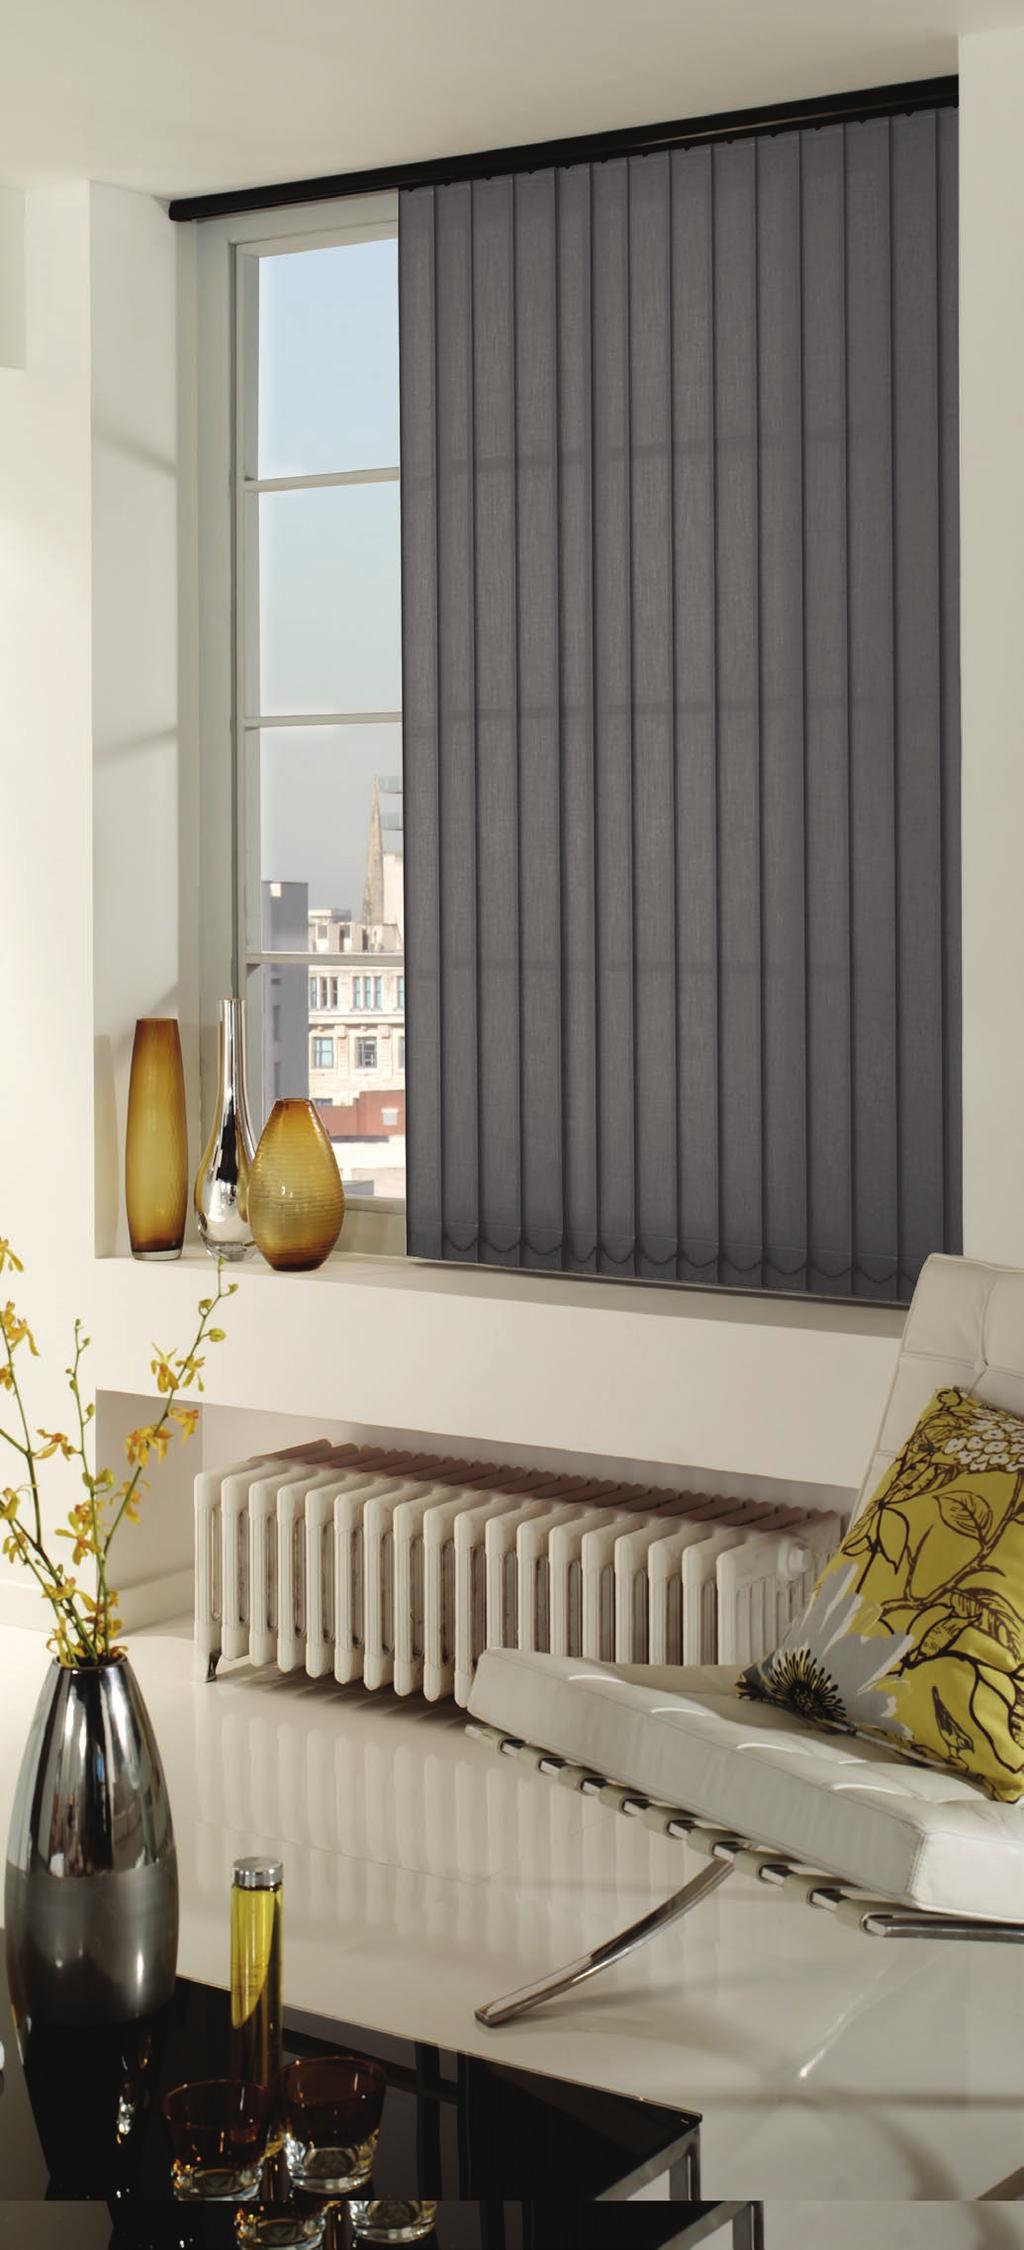 vertical blinds offer the ultimate in shading flexibility and privacy along with modern clean lines and